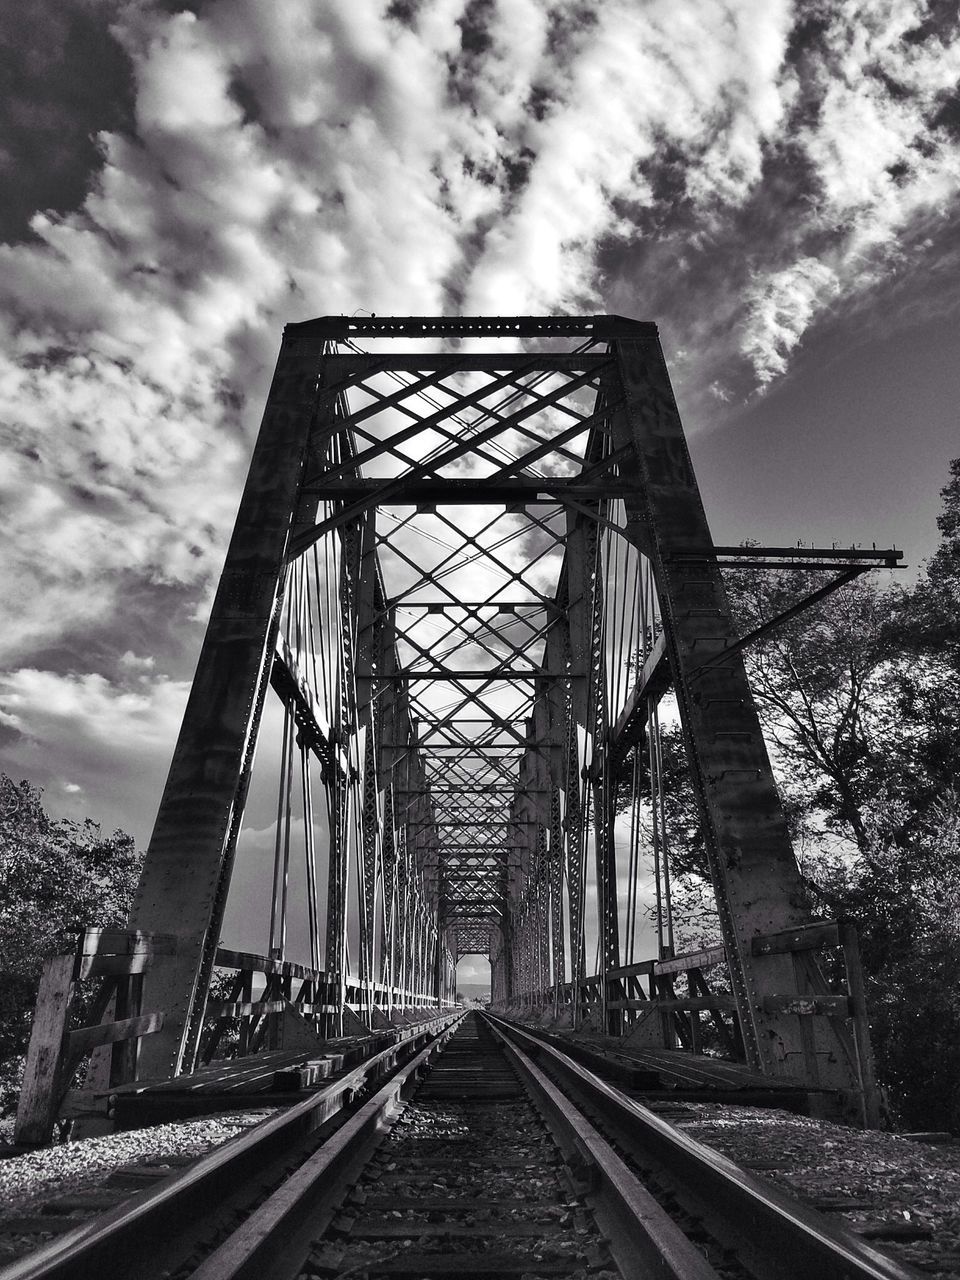 sky, cloud - sky, built structure, architecture, cloudy, the way forward, connection, cloud, railing, diminishing perspective, low angle view, bridge - man made structure, day, transportation, no people, outdoors, vanishing point, metal, railroad track, weather